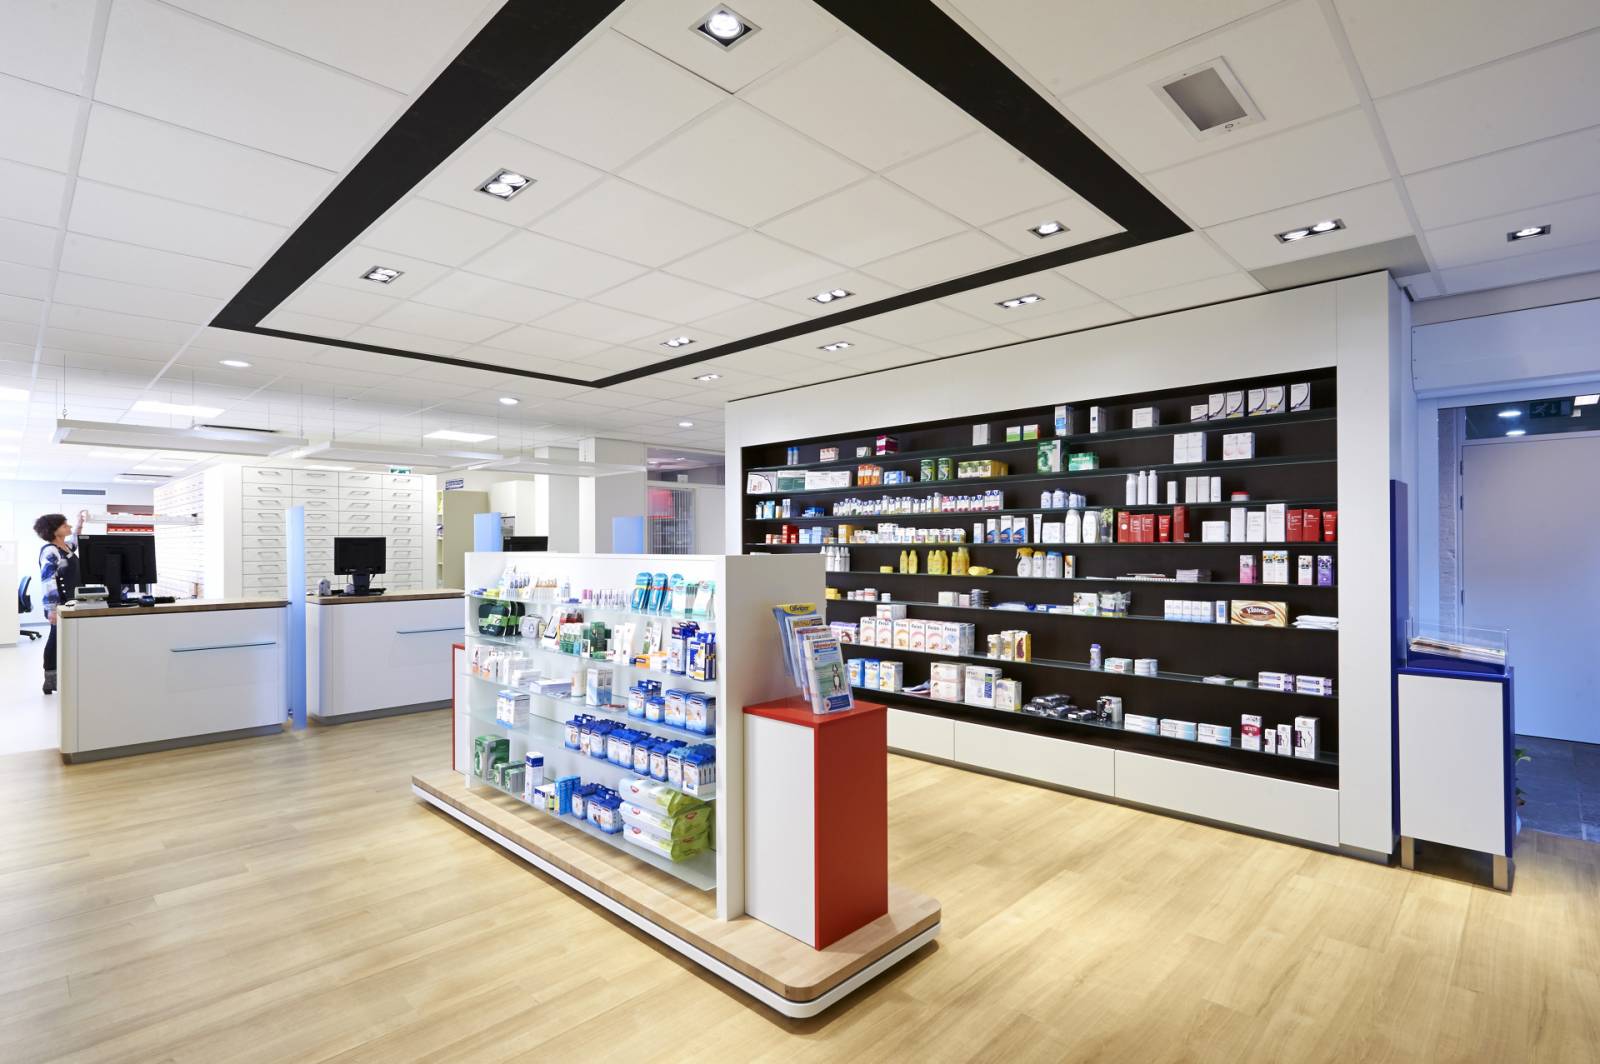 Secure your Drugstore and Pharmacy with EAS Antennas from Cross Point